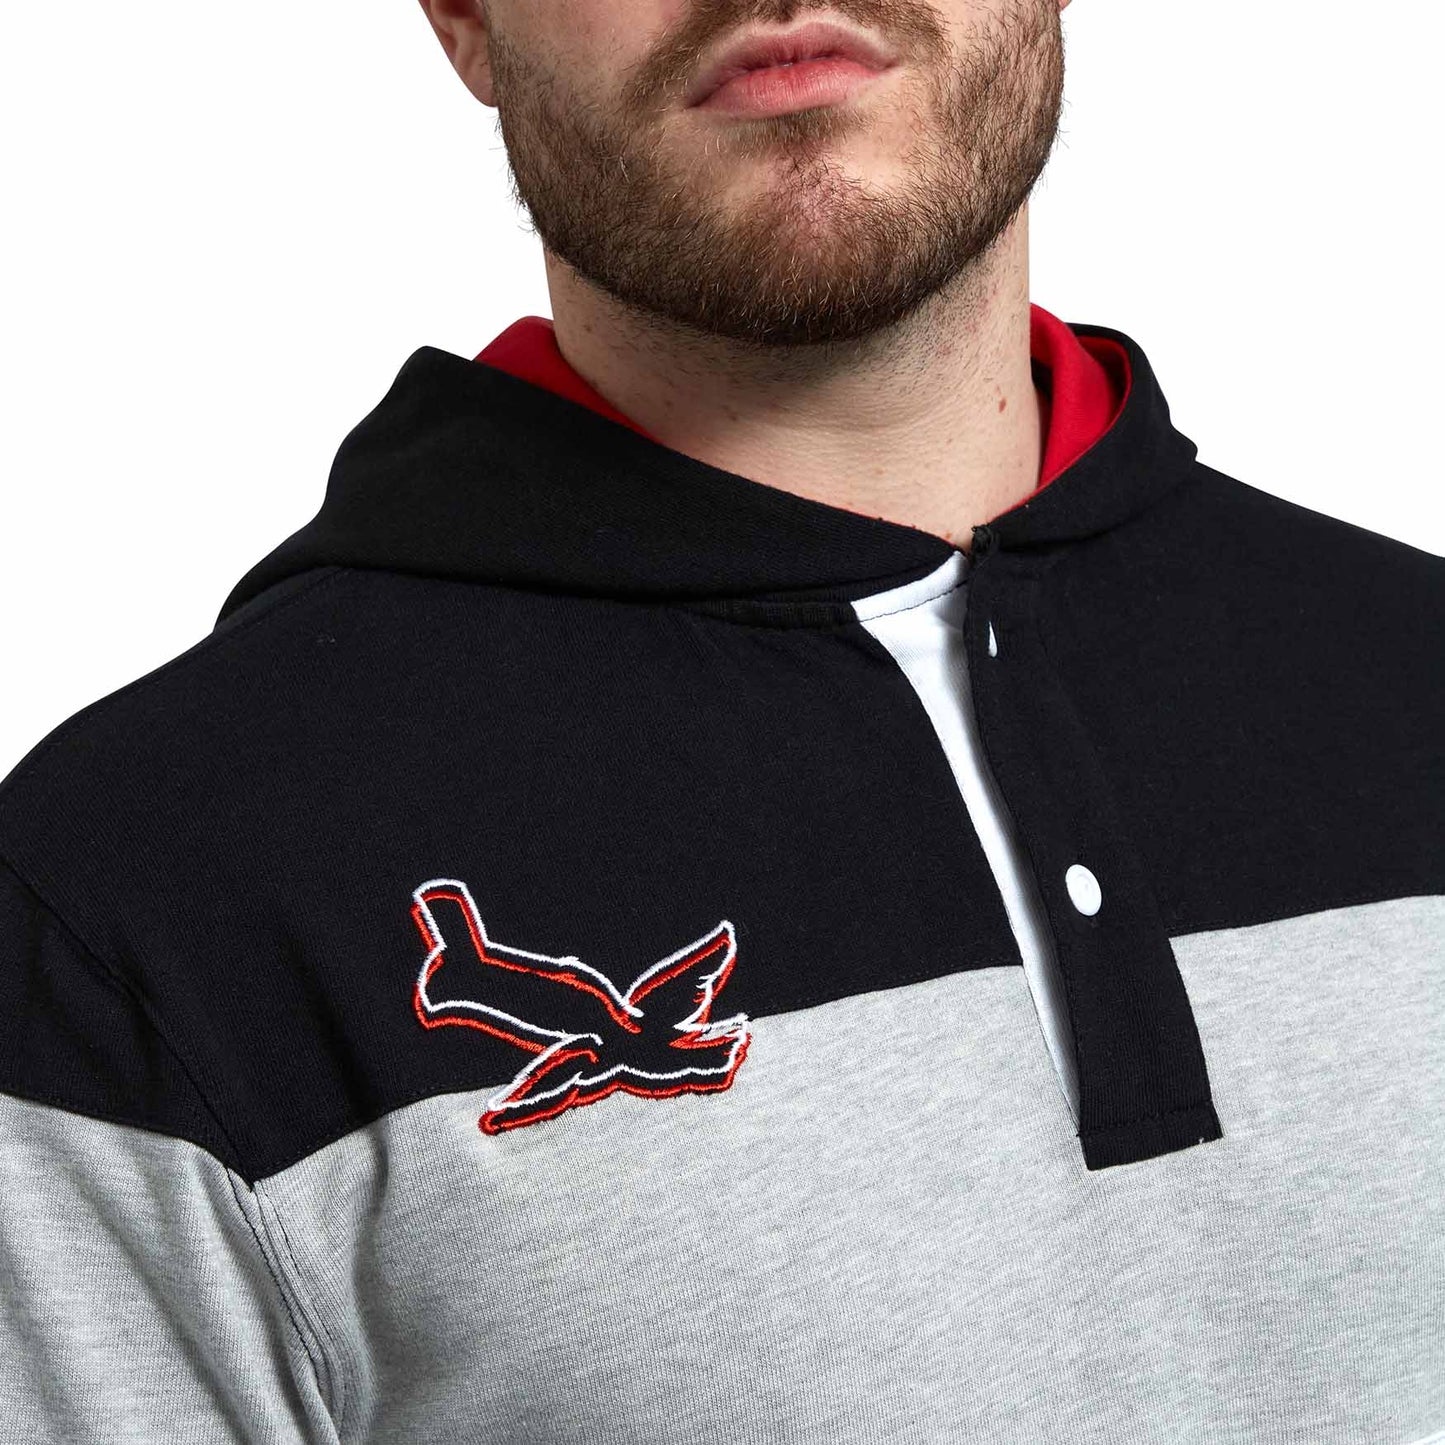 A hooded man, wearing a Guinness Black & Red Toucan Hooded Rugby hoodie.